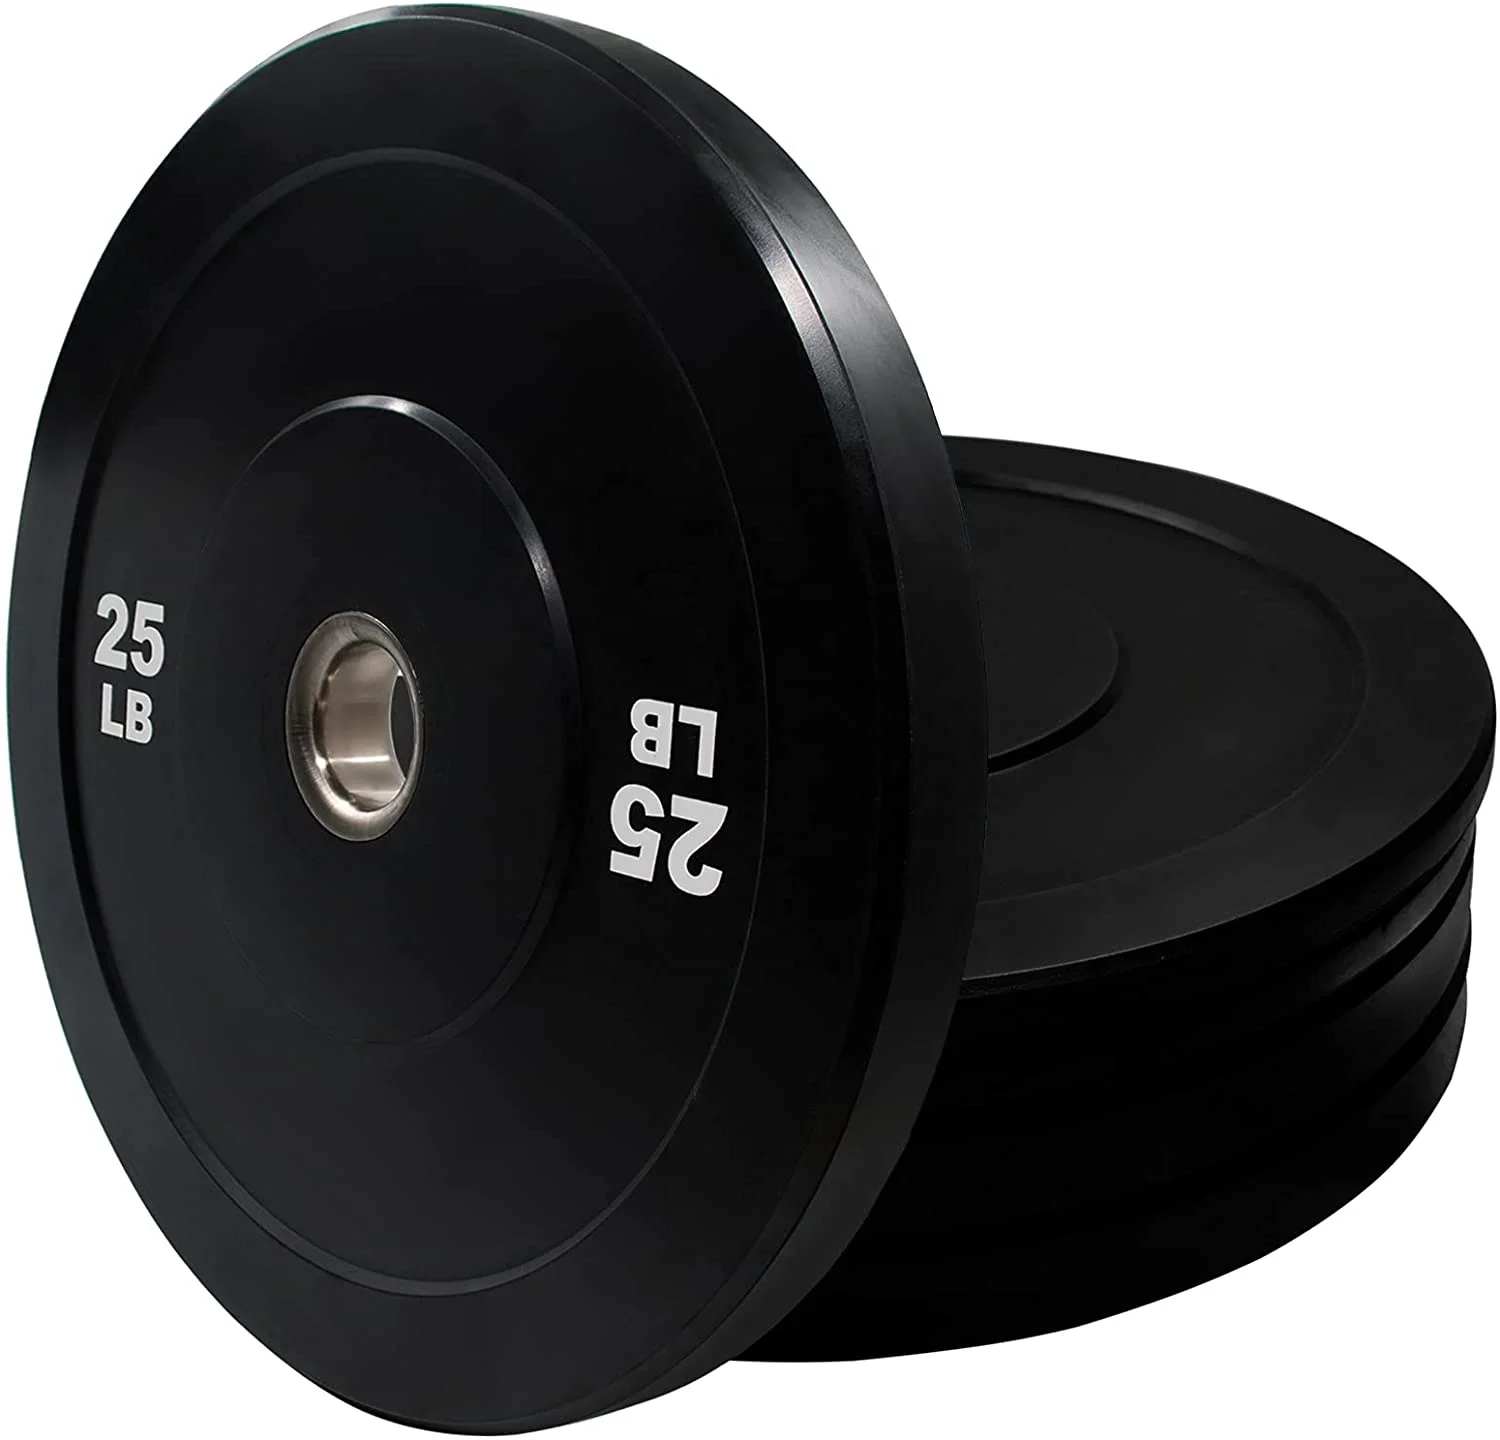 

HG Custom Free Weight Plate Rubber Covered Black Bumper Plates For Barbell Weight Lifting Plate Set Lbs